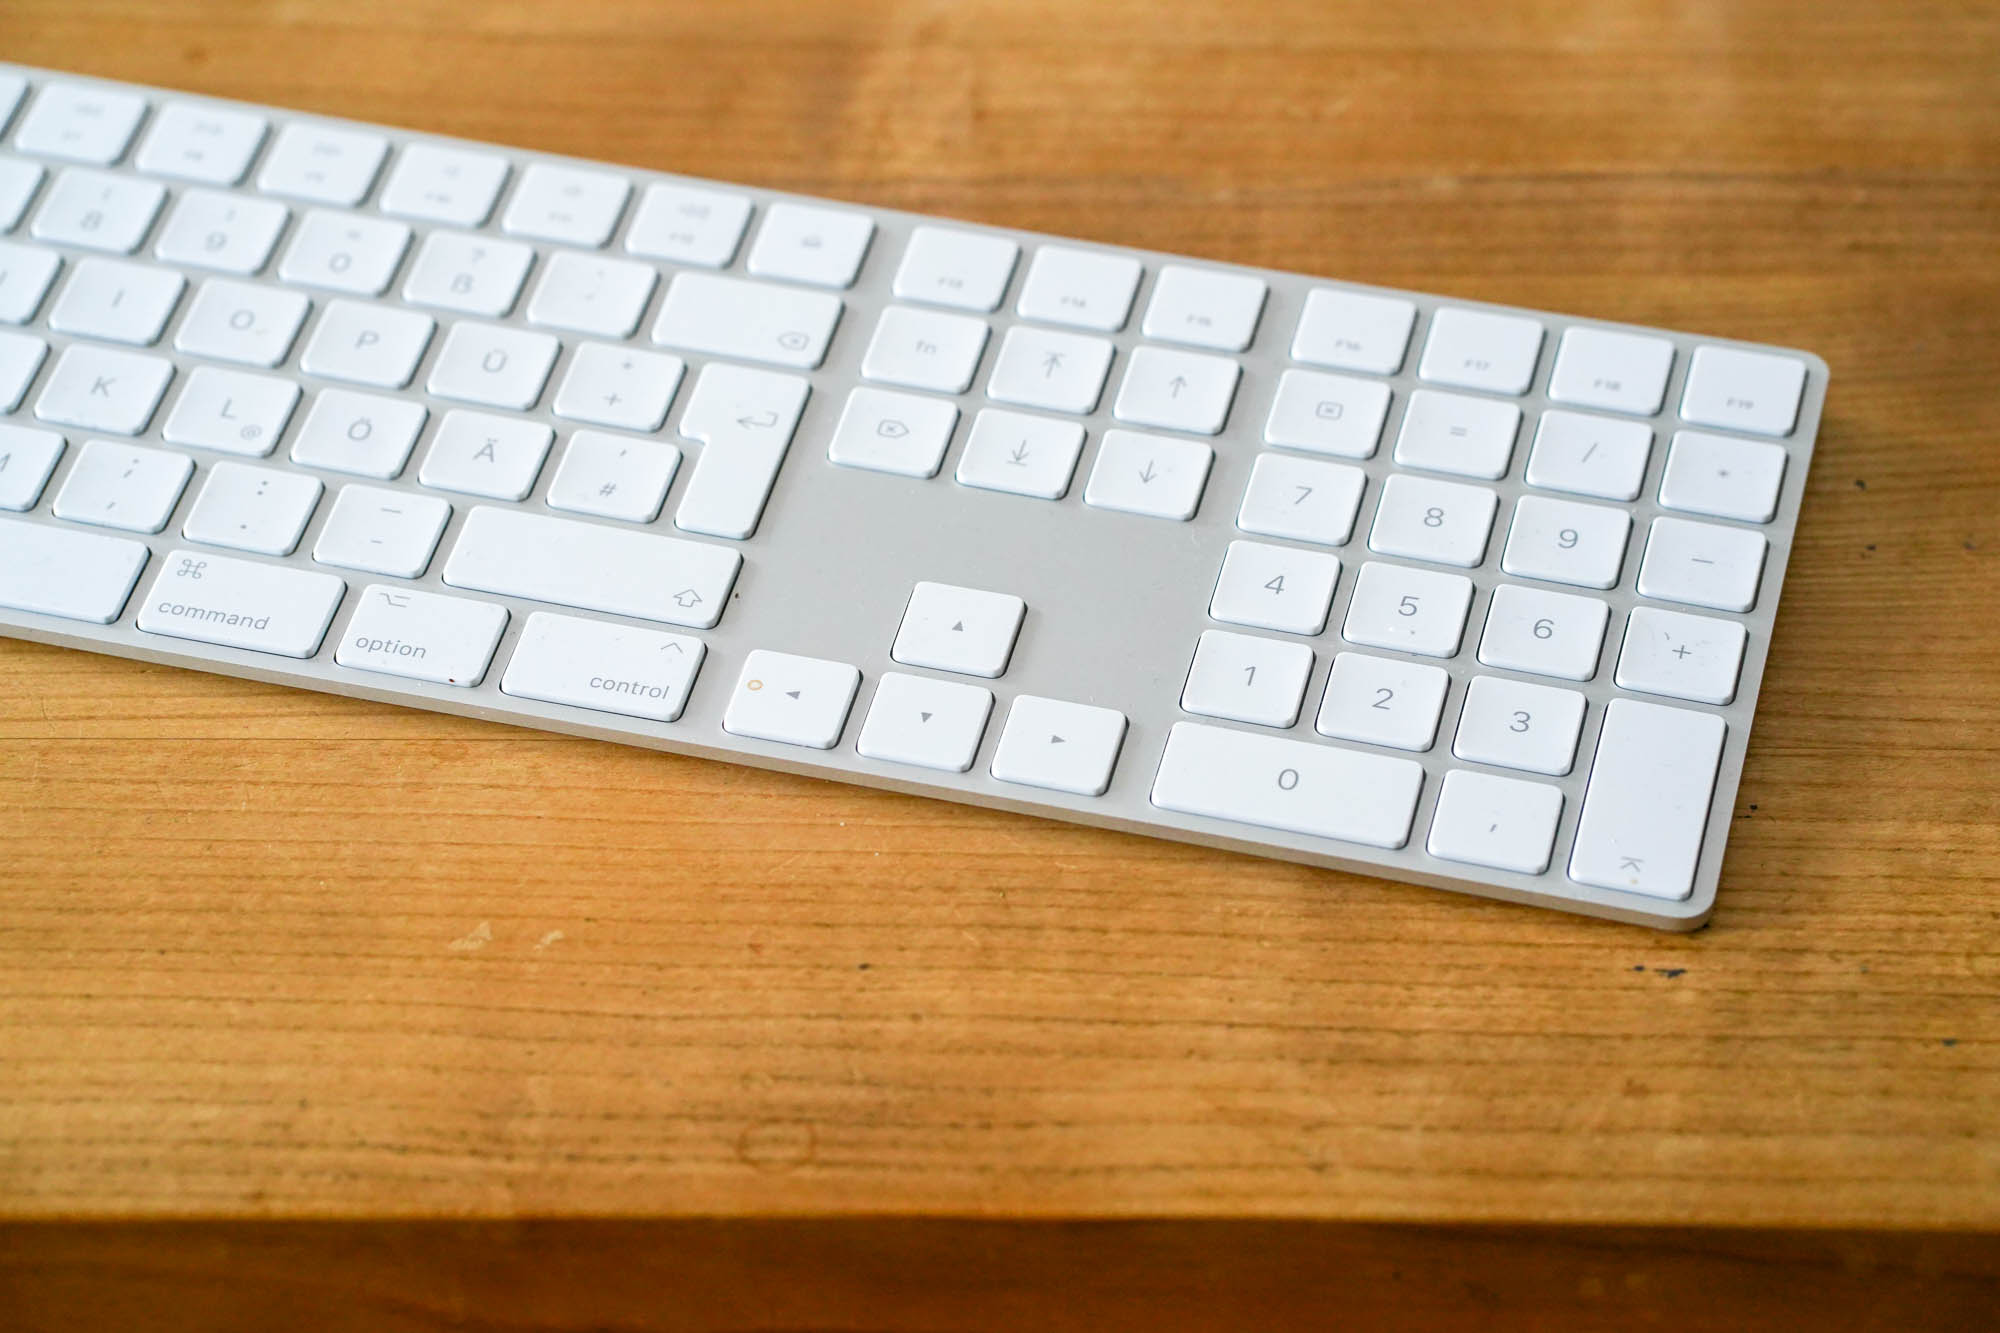 A white keyboard with some letters missing